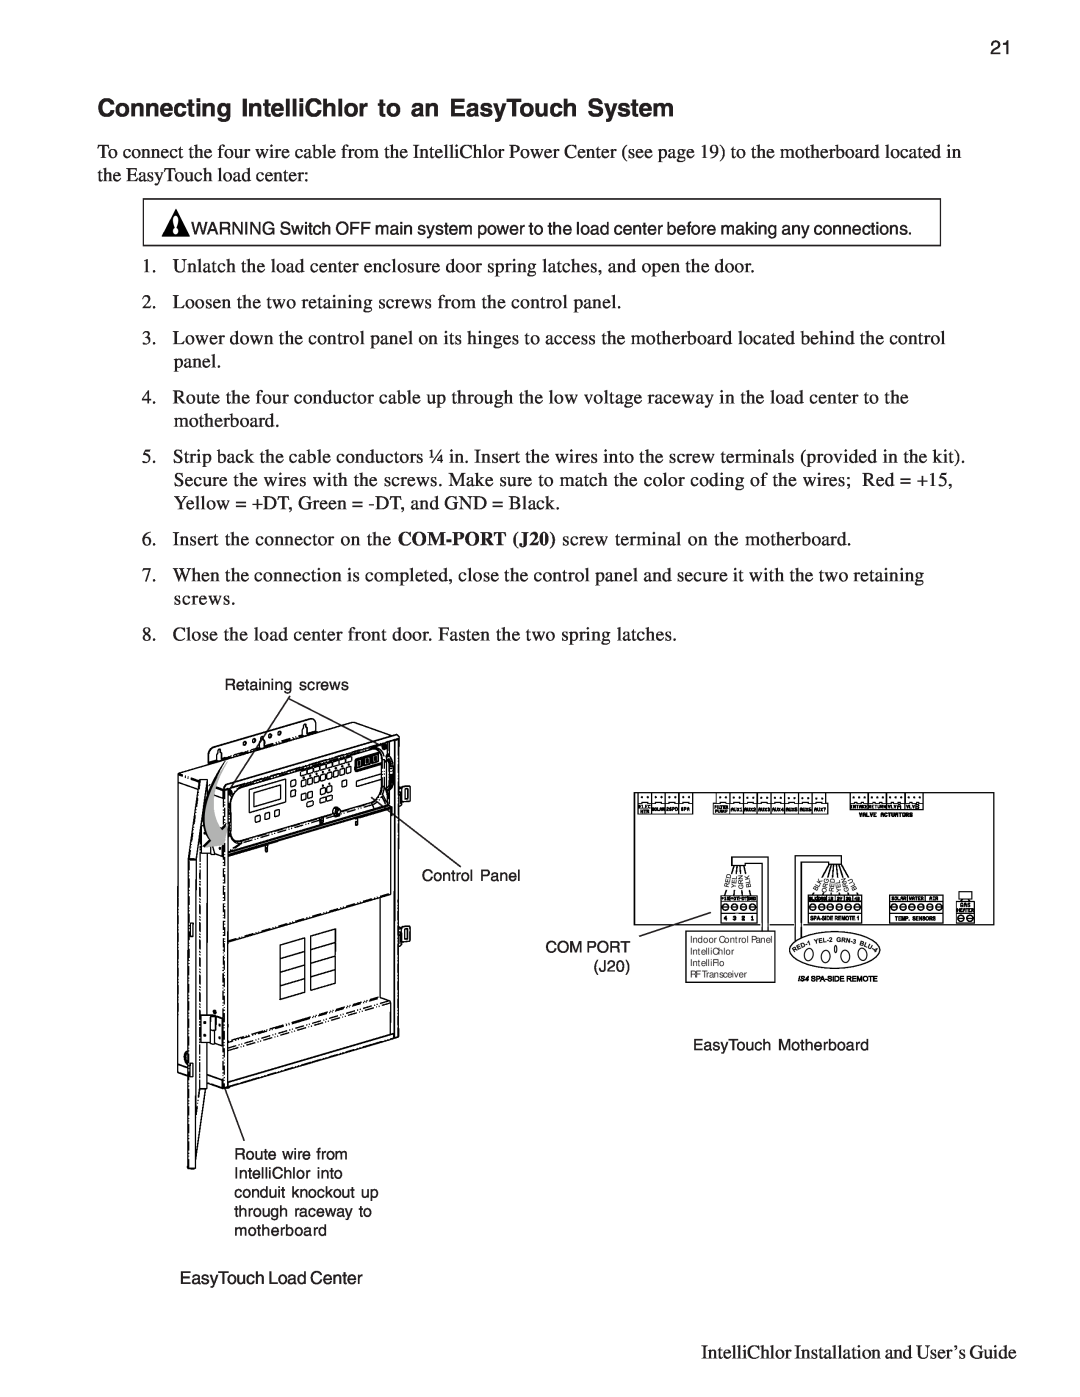 Pentair IC20, IC40 important safety instructions Connecting IntelliChlor to an EasyTouch System, EasyTouch Load Center 